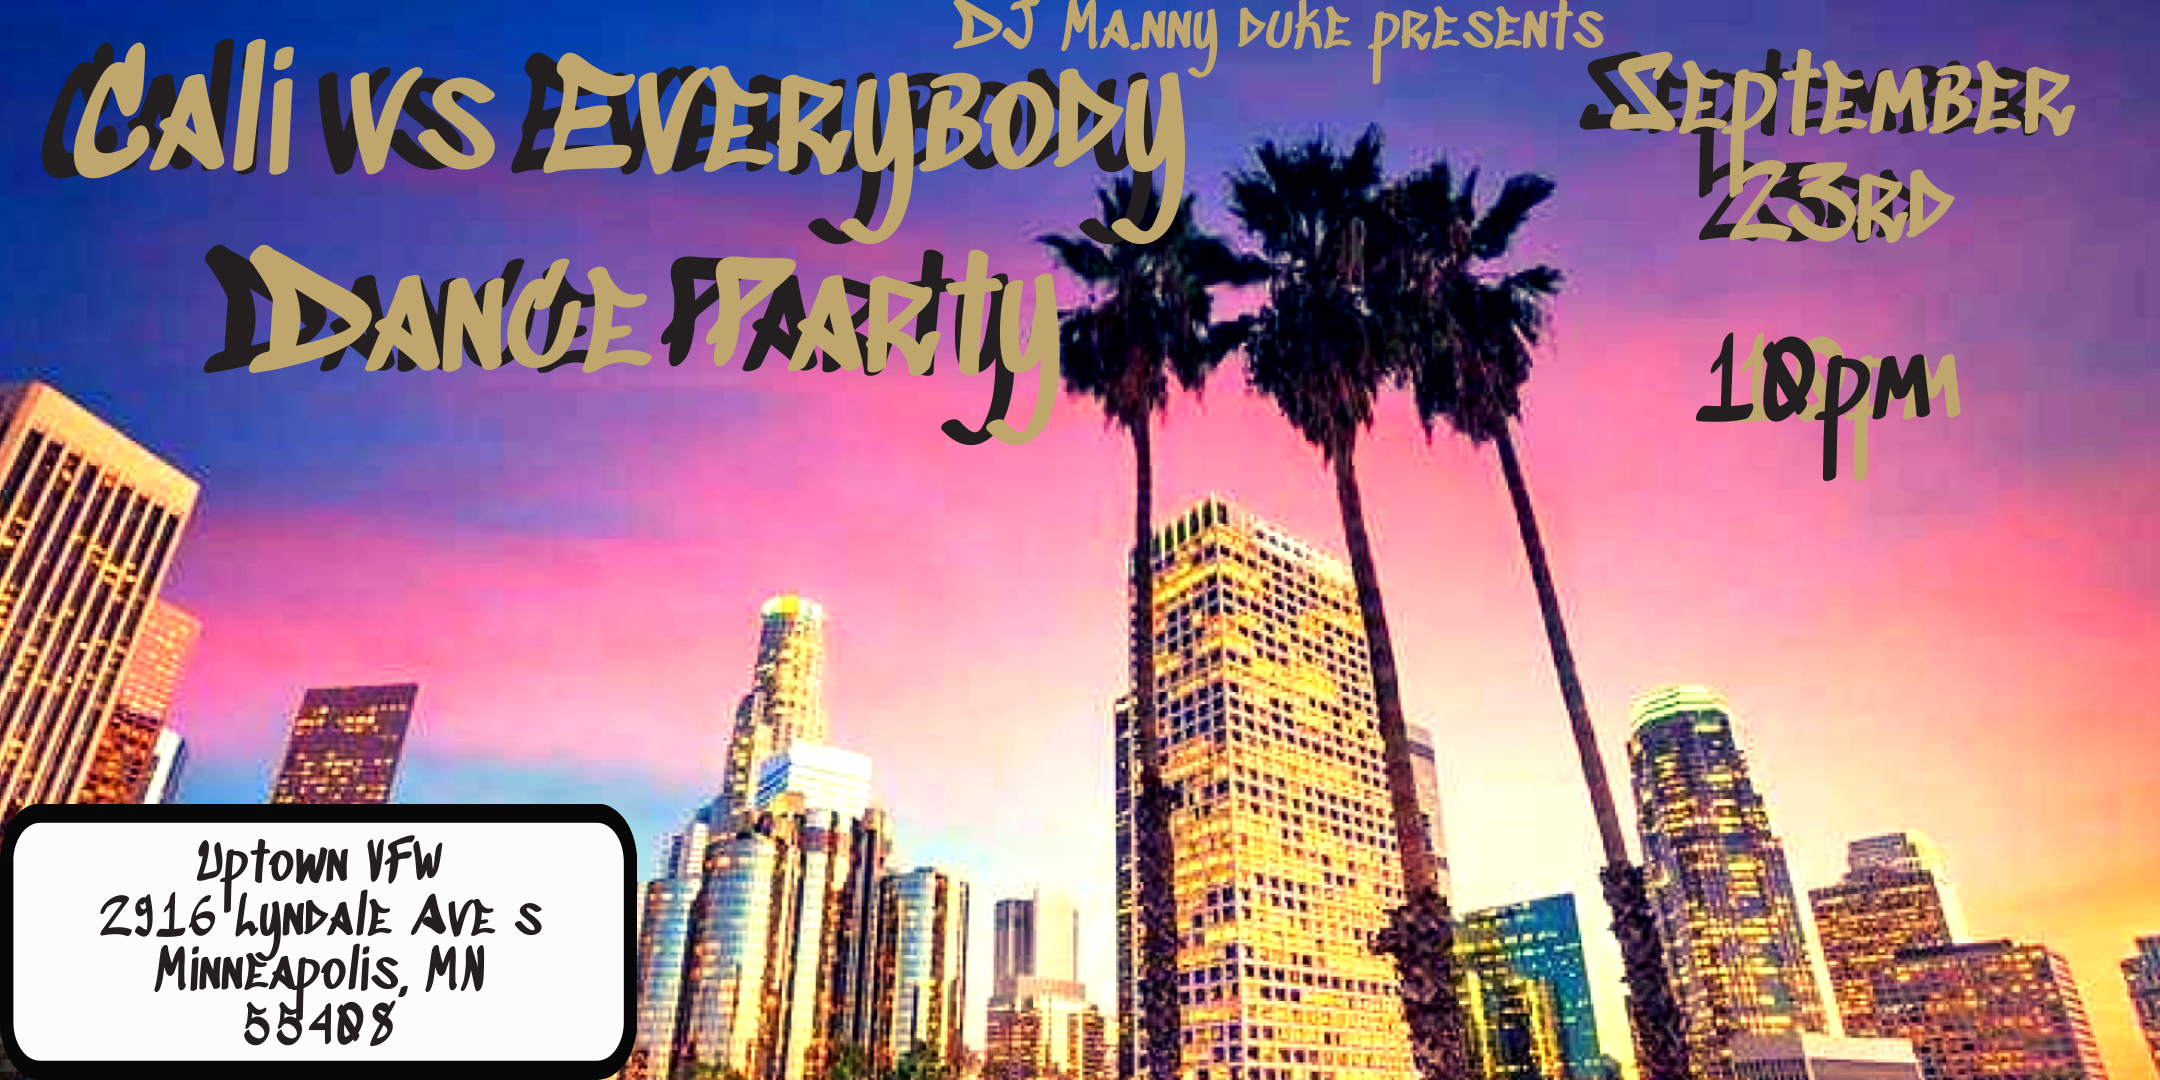 DJ Manny Presents: Cali Vs. Everybody Dance Party Saturday September 23 James Ballentine "Uptown" VFW Post 246 2916 Lyndale Ave S. Doors 10:00pm :: Music 10:00pm :: 21+ GA $5 ADV / $10 DOS